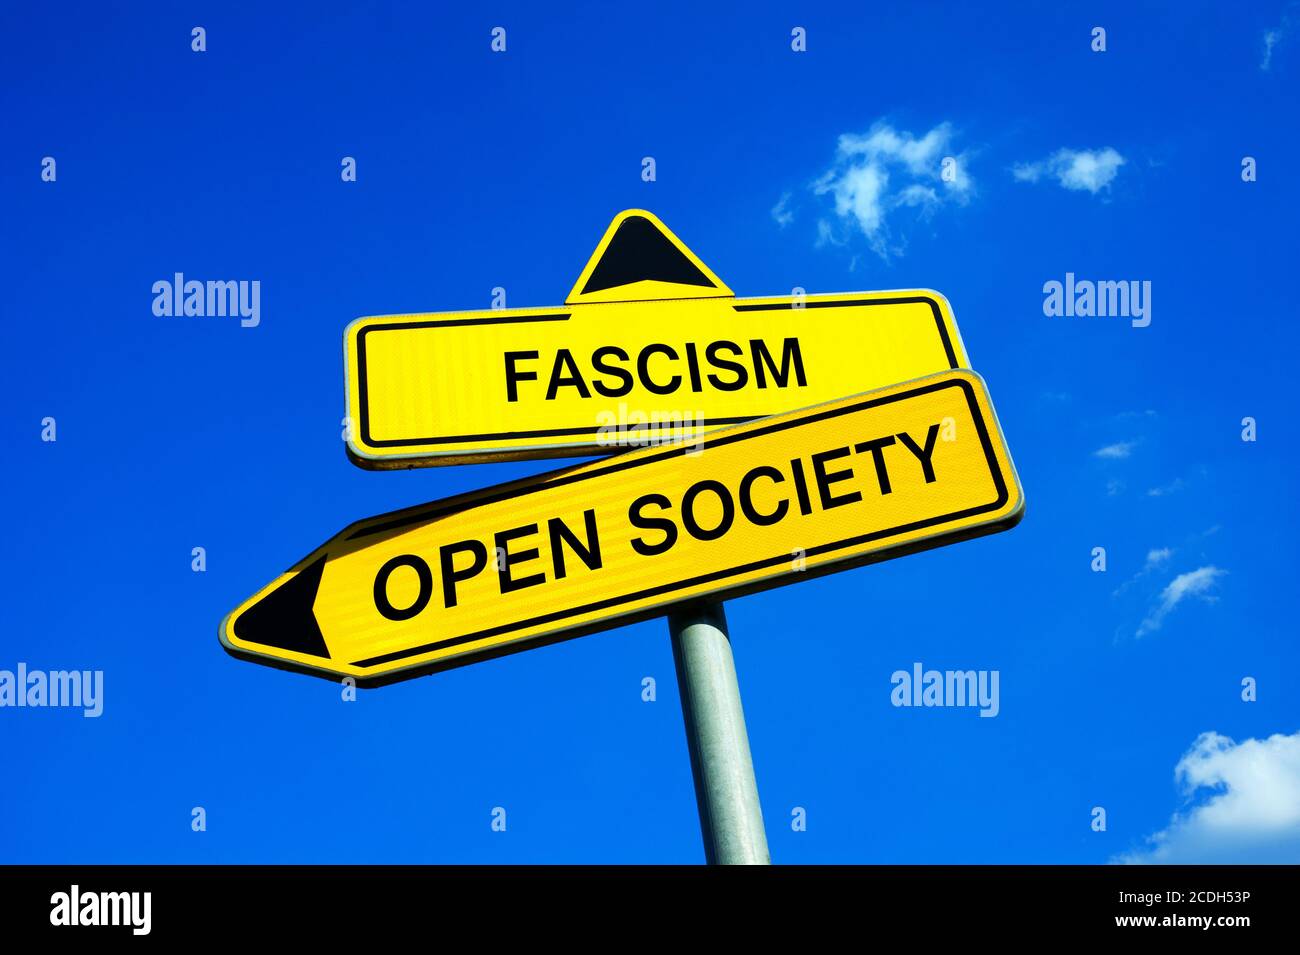 Fascism or Open Society - Traffic sign with two options - election on heading of society, state and government - fascist populism and authoritarianism Stock Photo